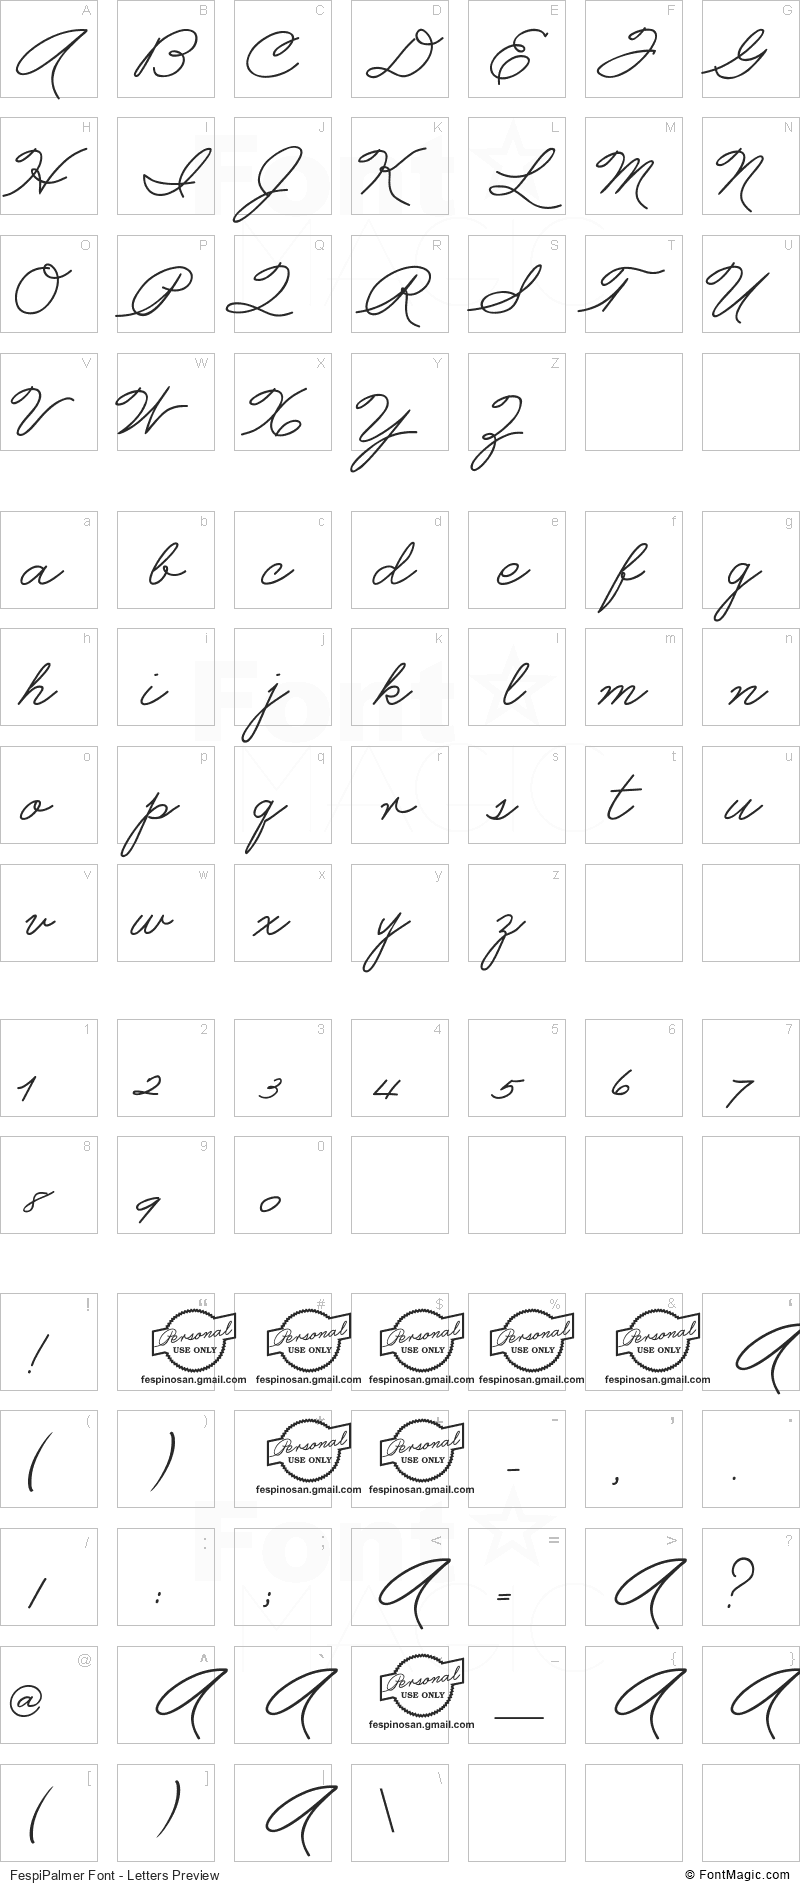 FespiPalmer Font - All Latters Preview Chart